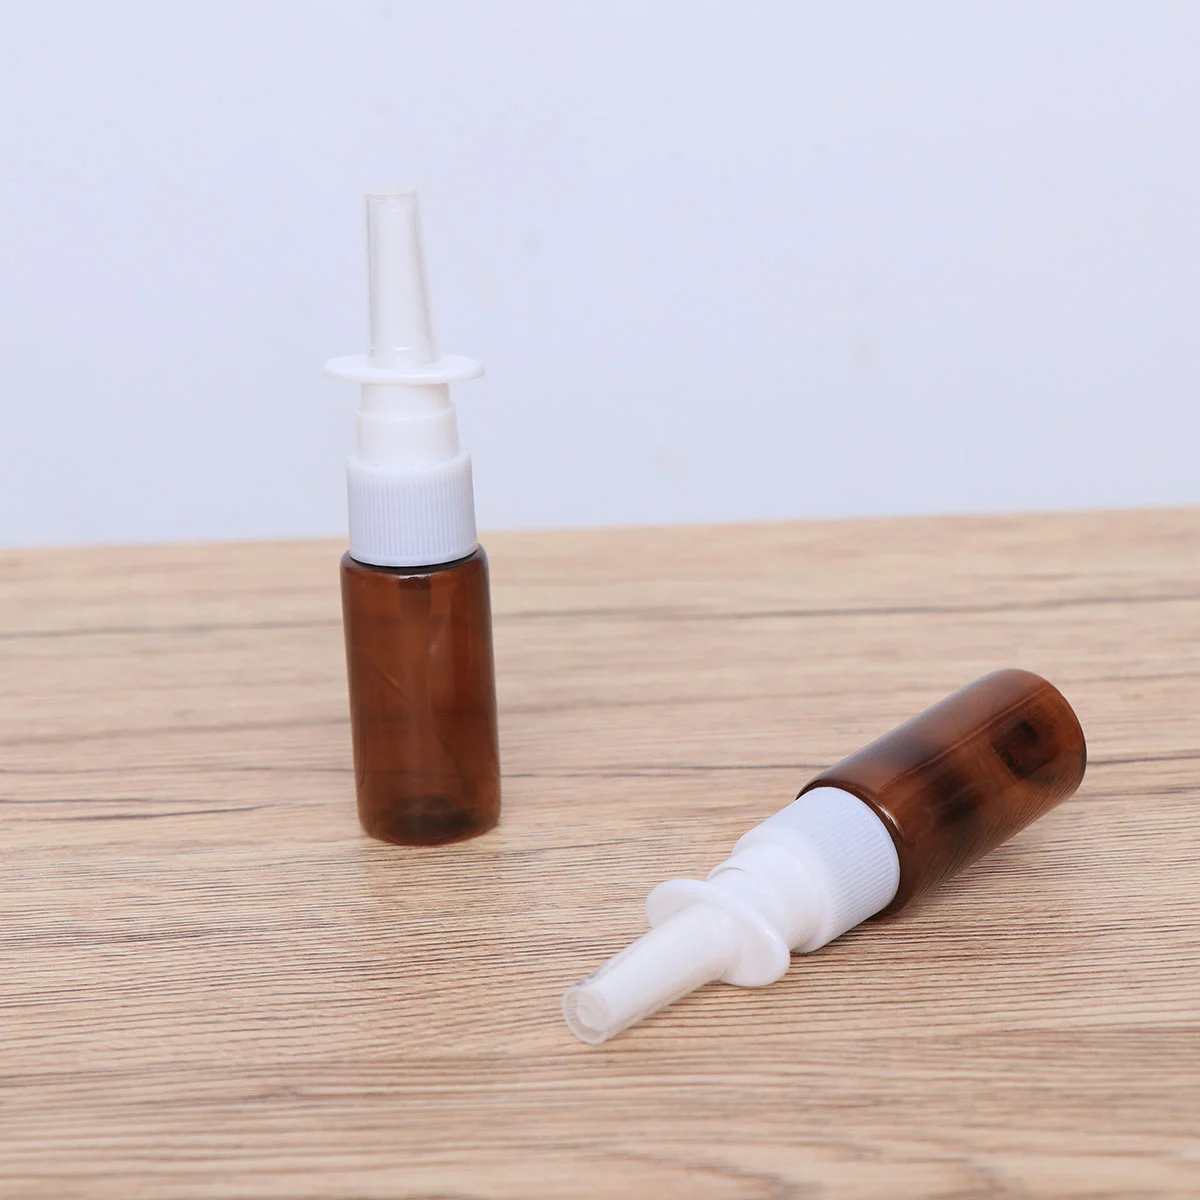 

10Pcs Empty Nasal Spray Bottles Refillable Fine Mist Sprayers Atomizers Makeup Water Container for Perfumes Essential Oils 15ml